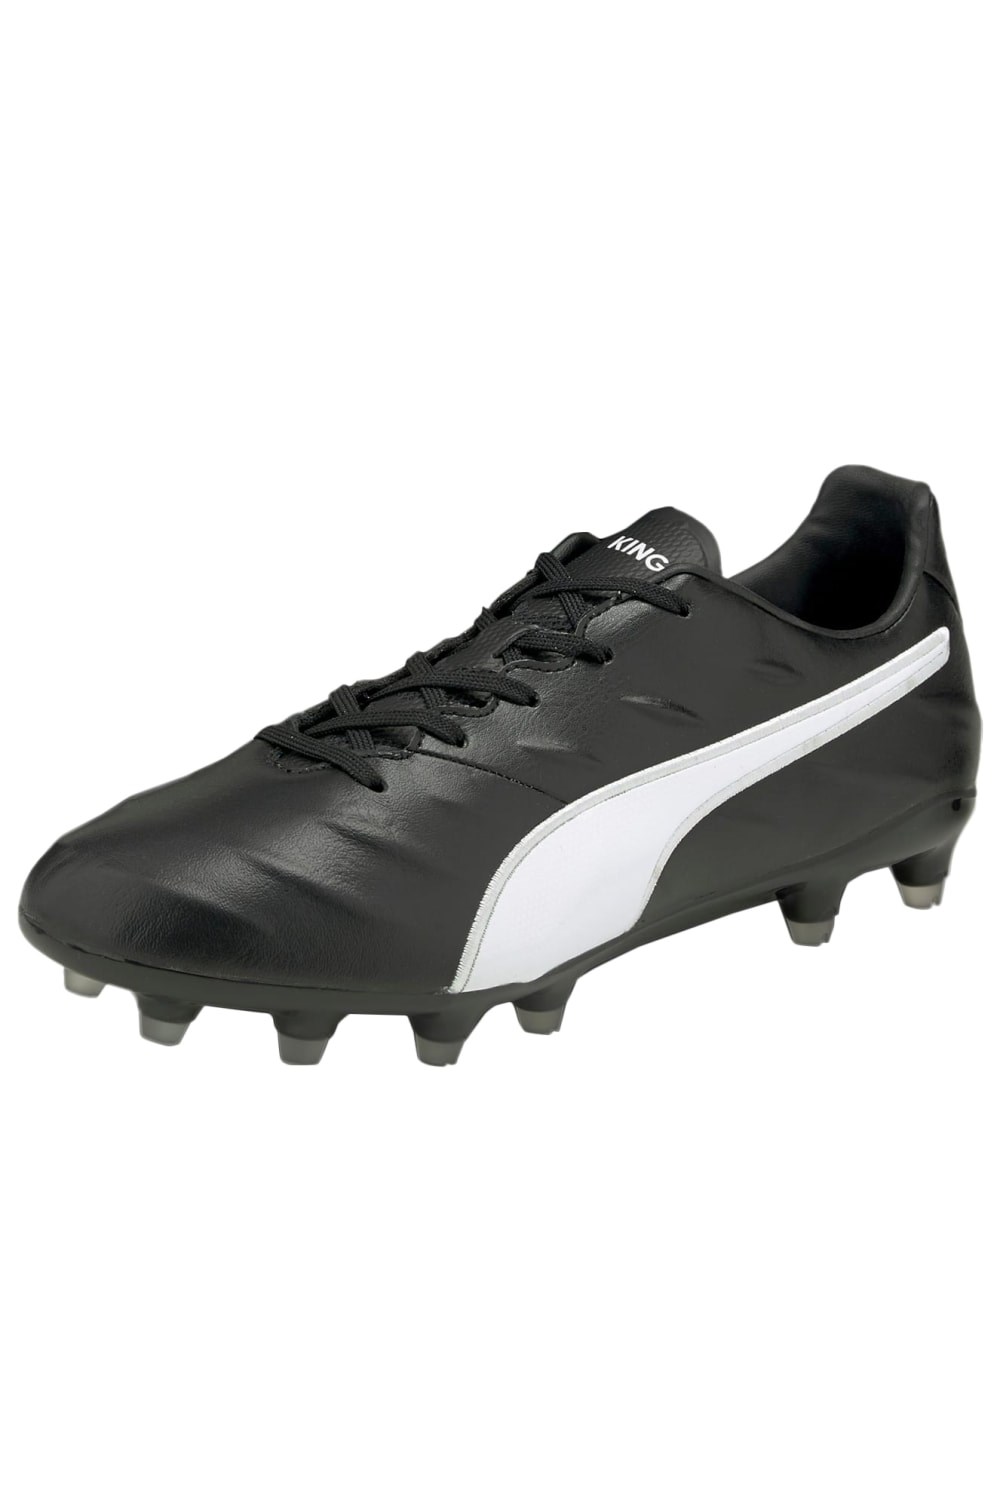 King Pro 21 Mens Leather Football Boots -